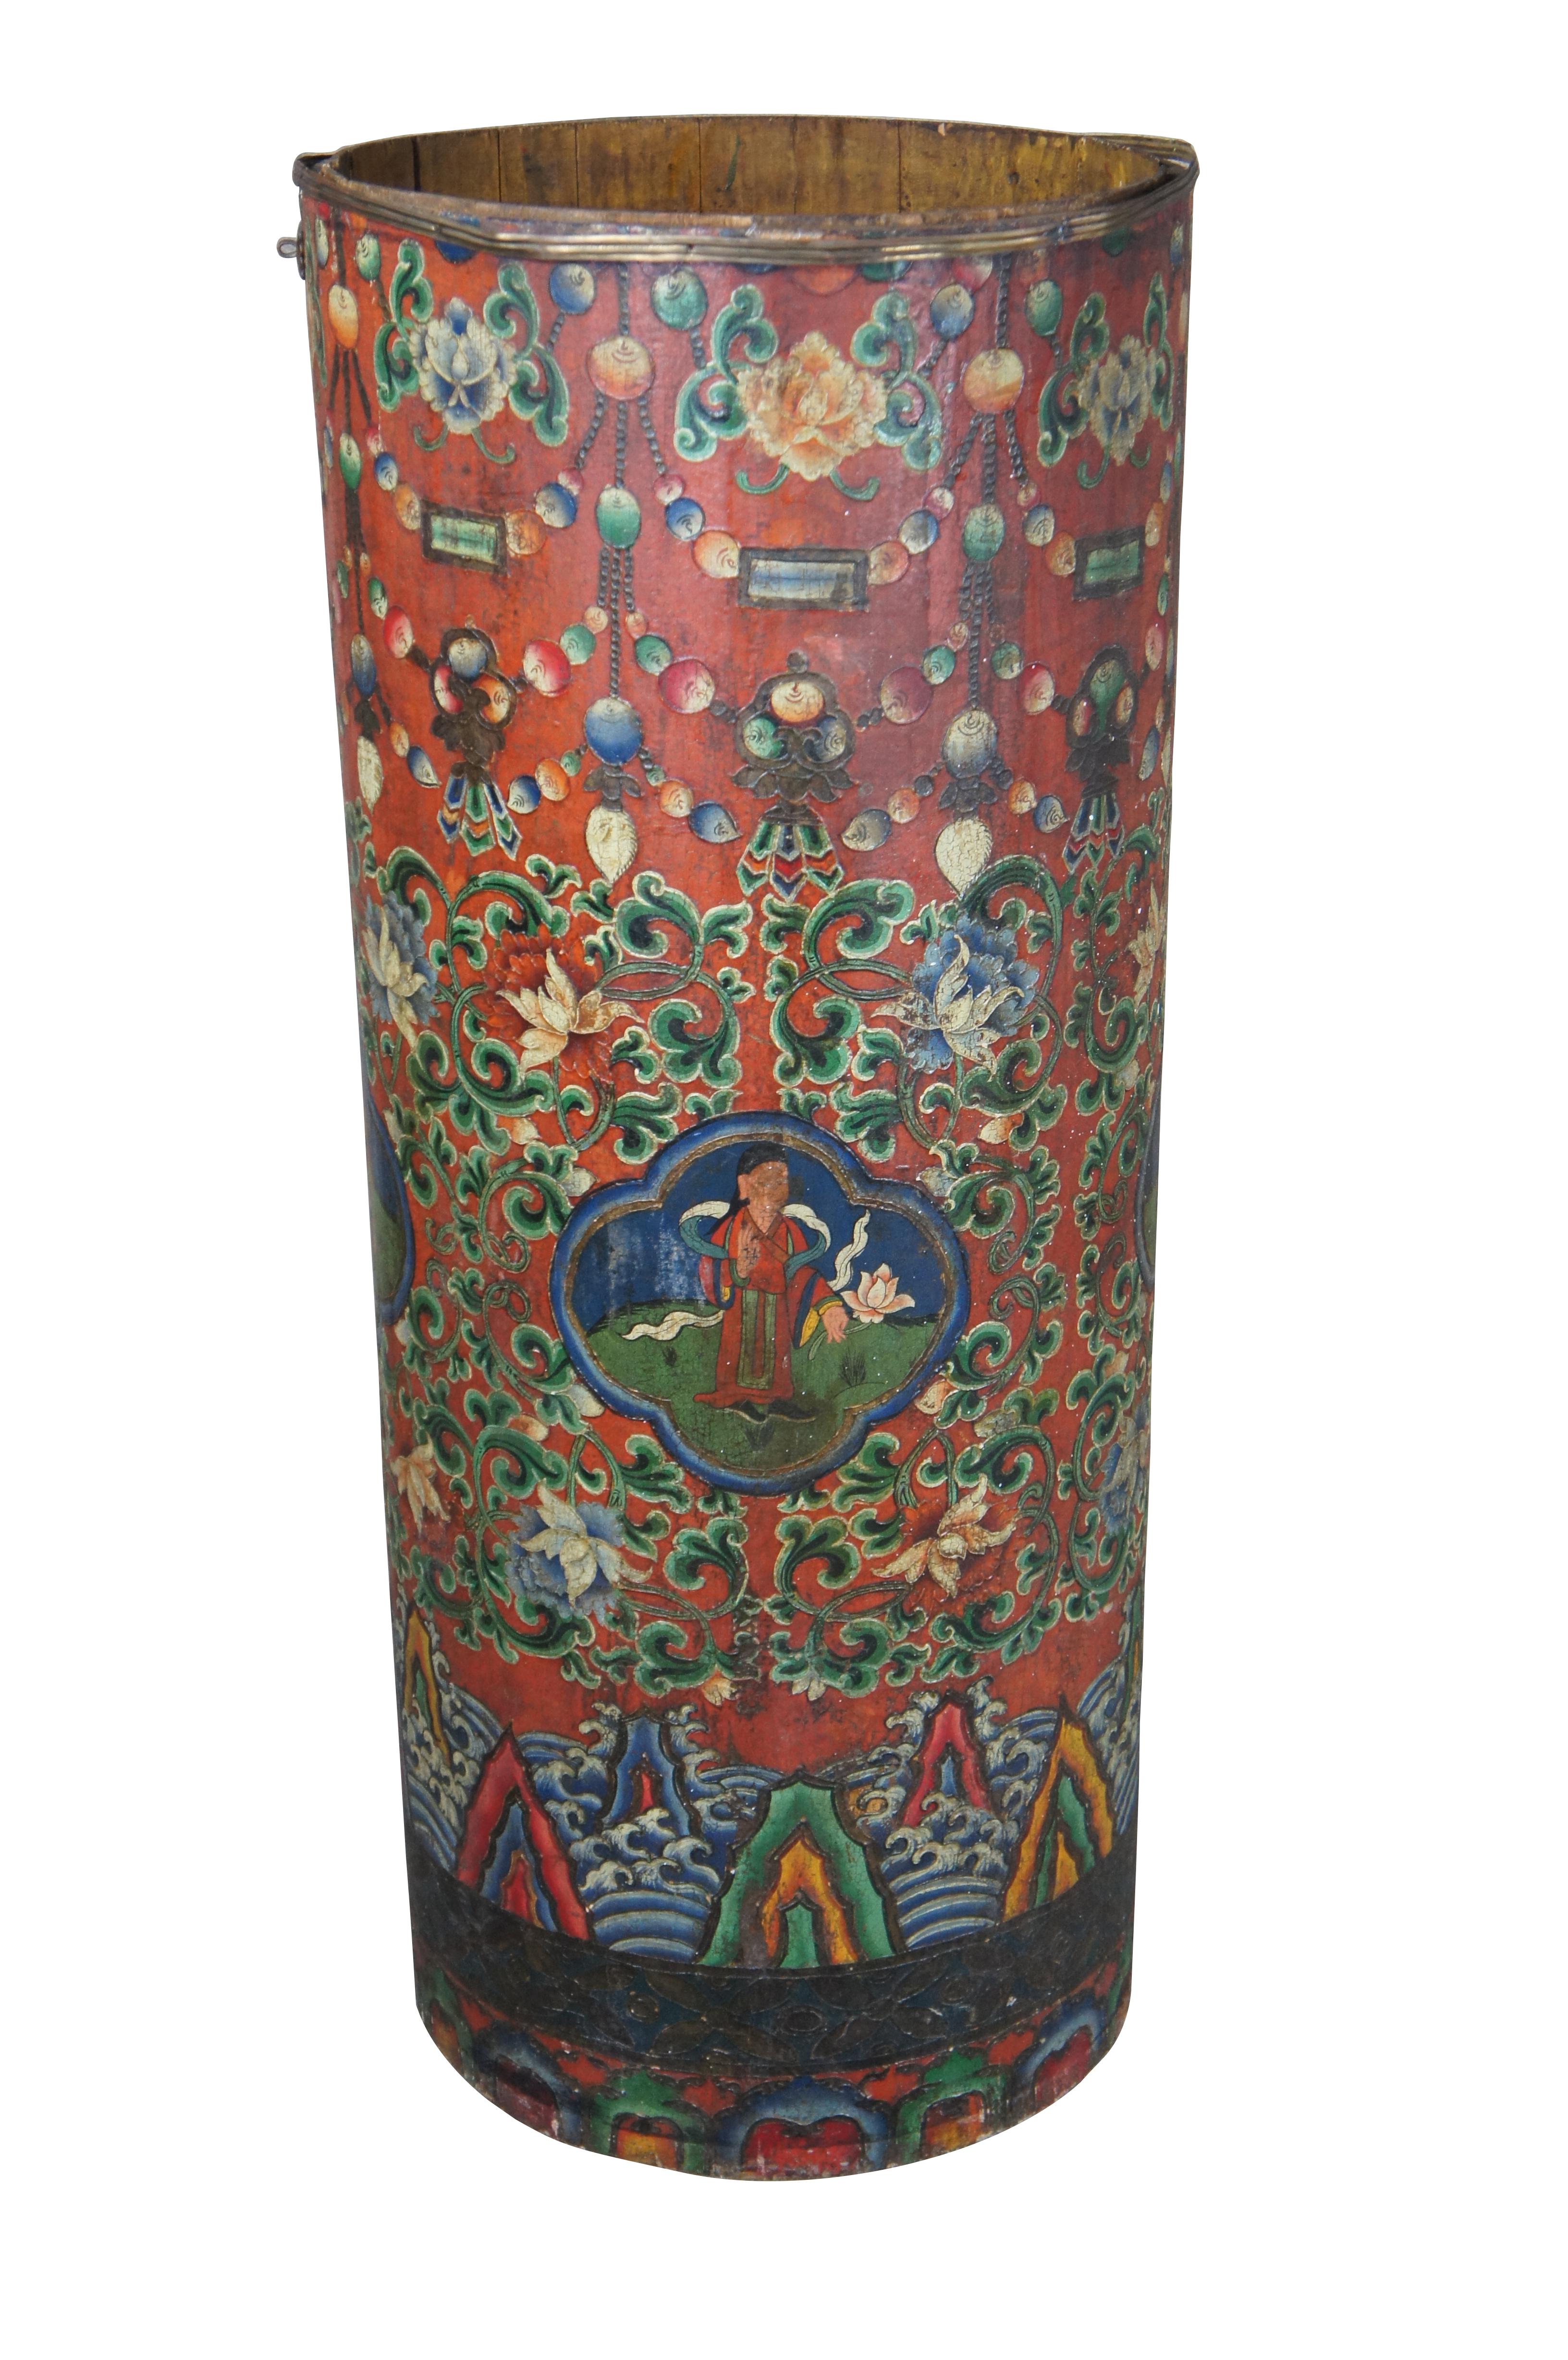 20th Century Tibetan hand painted cylindrical box, barrel, bin or umbrella stand. Features a vibrant polychrome pattern featuring foliate and beaded designs. Mountains and clouds can be seen at the base as well as a different figure at every quarter